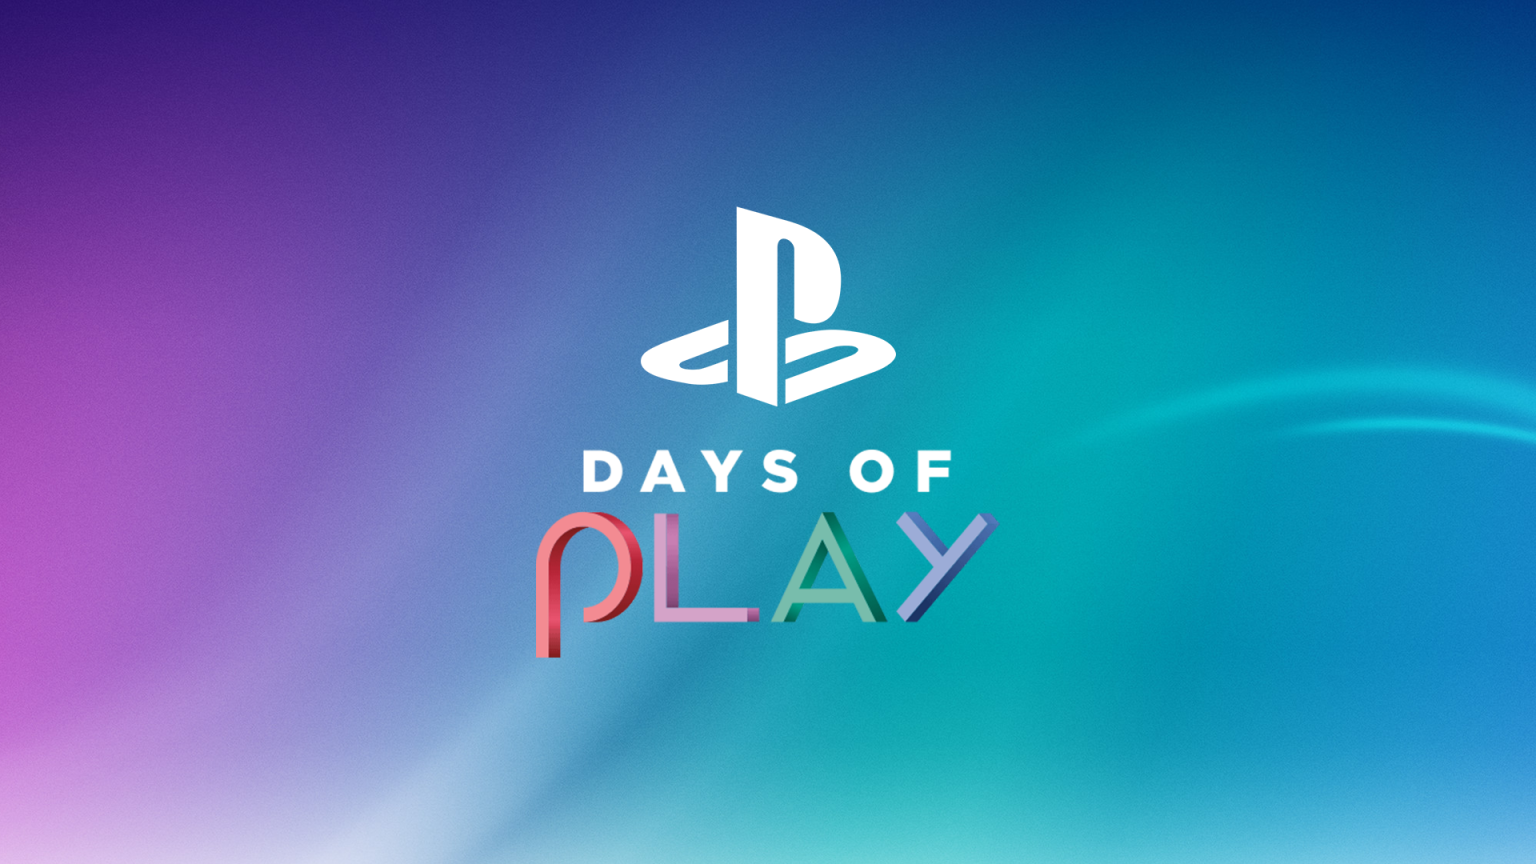 Playstation days. Day of Play PLAYSTATION. PLAYSTATION распродажа. PLAYSTATION State of Play 2021.